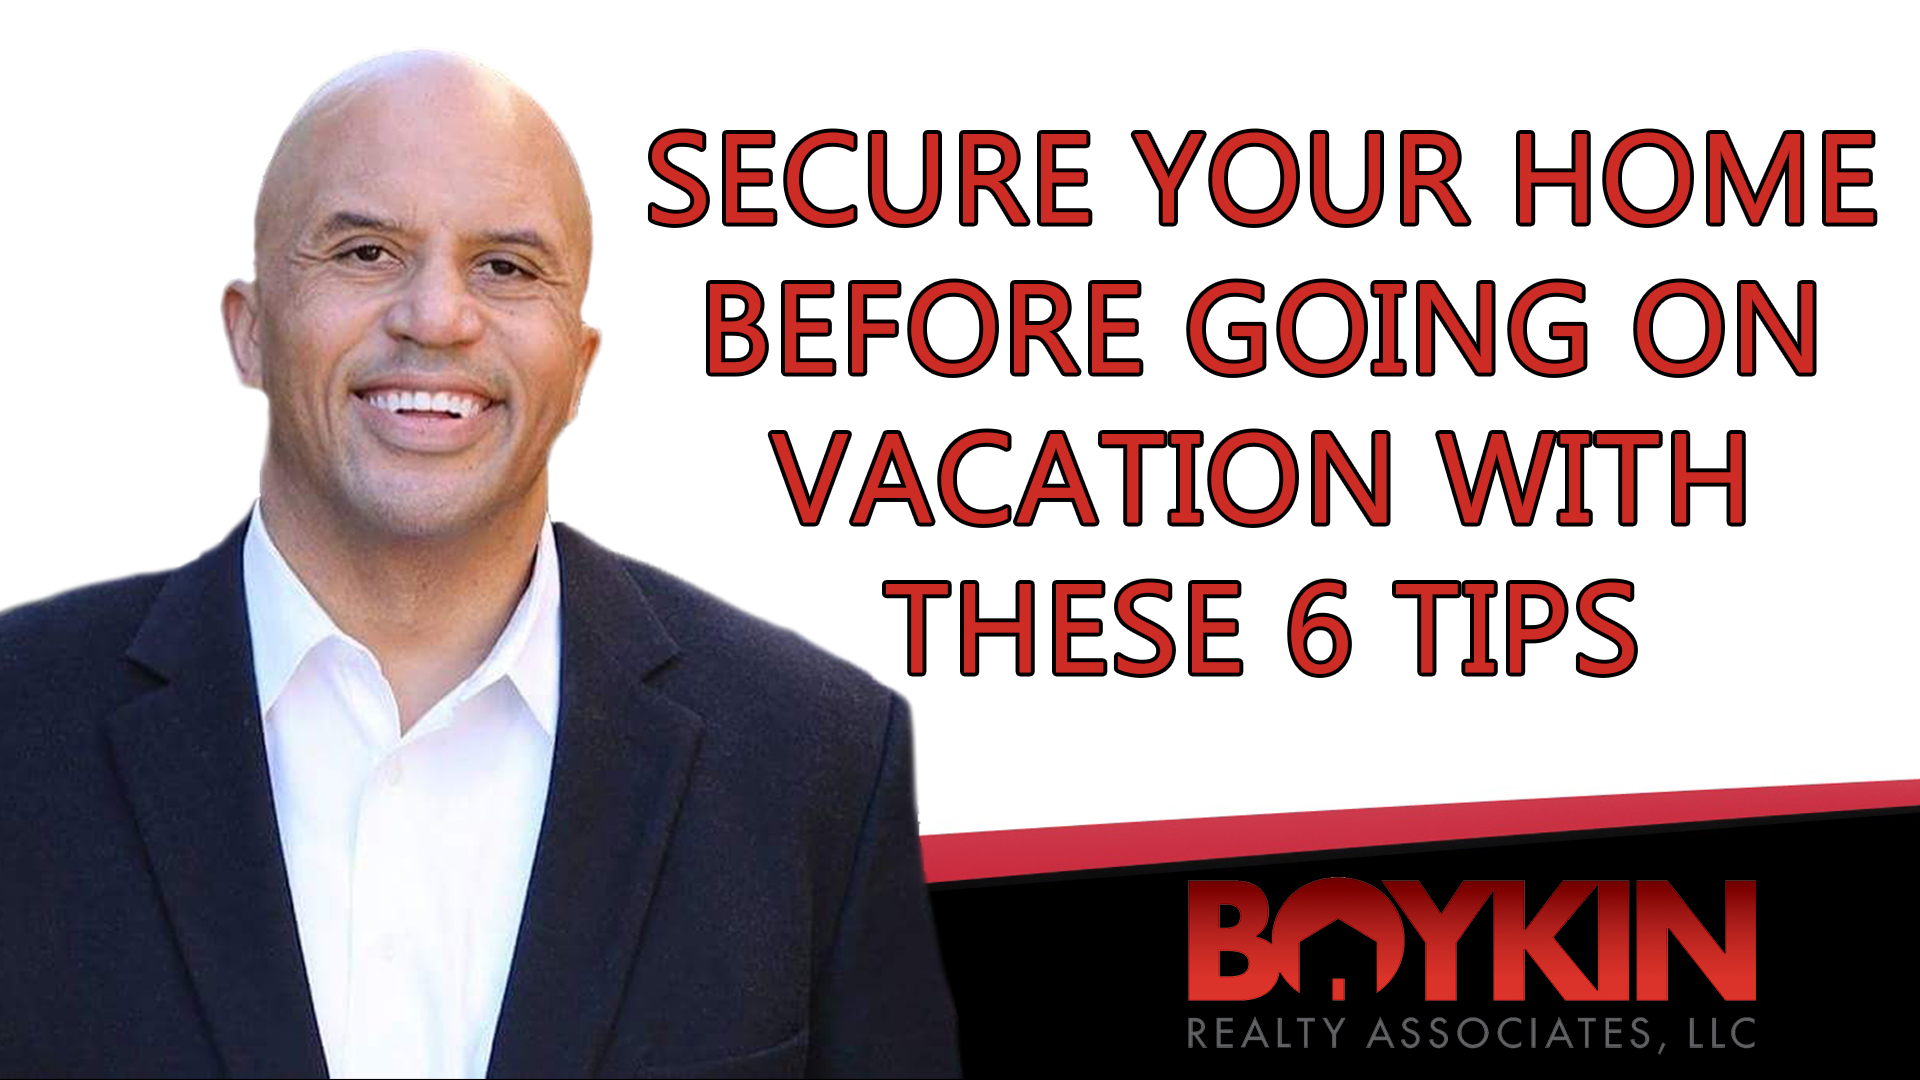 Before You Go on Vacation, Secure Your Home With These 6 Tips